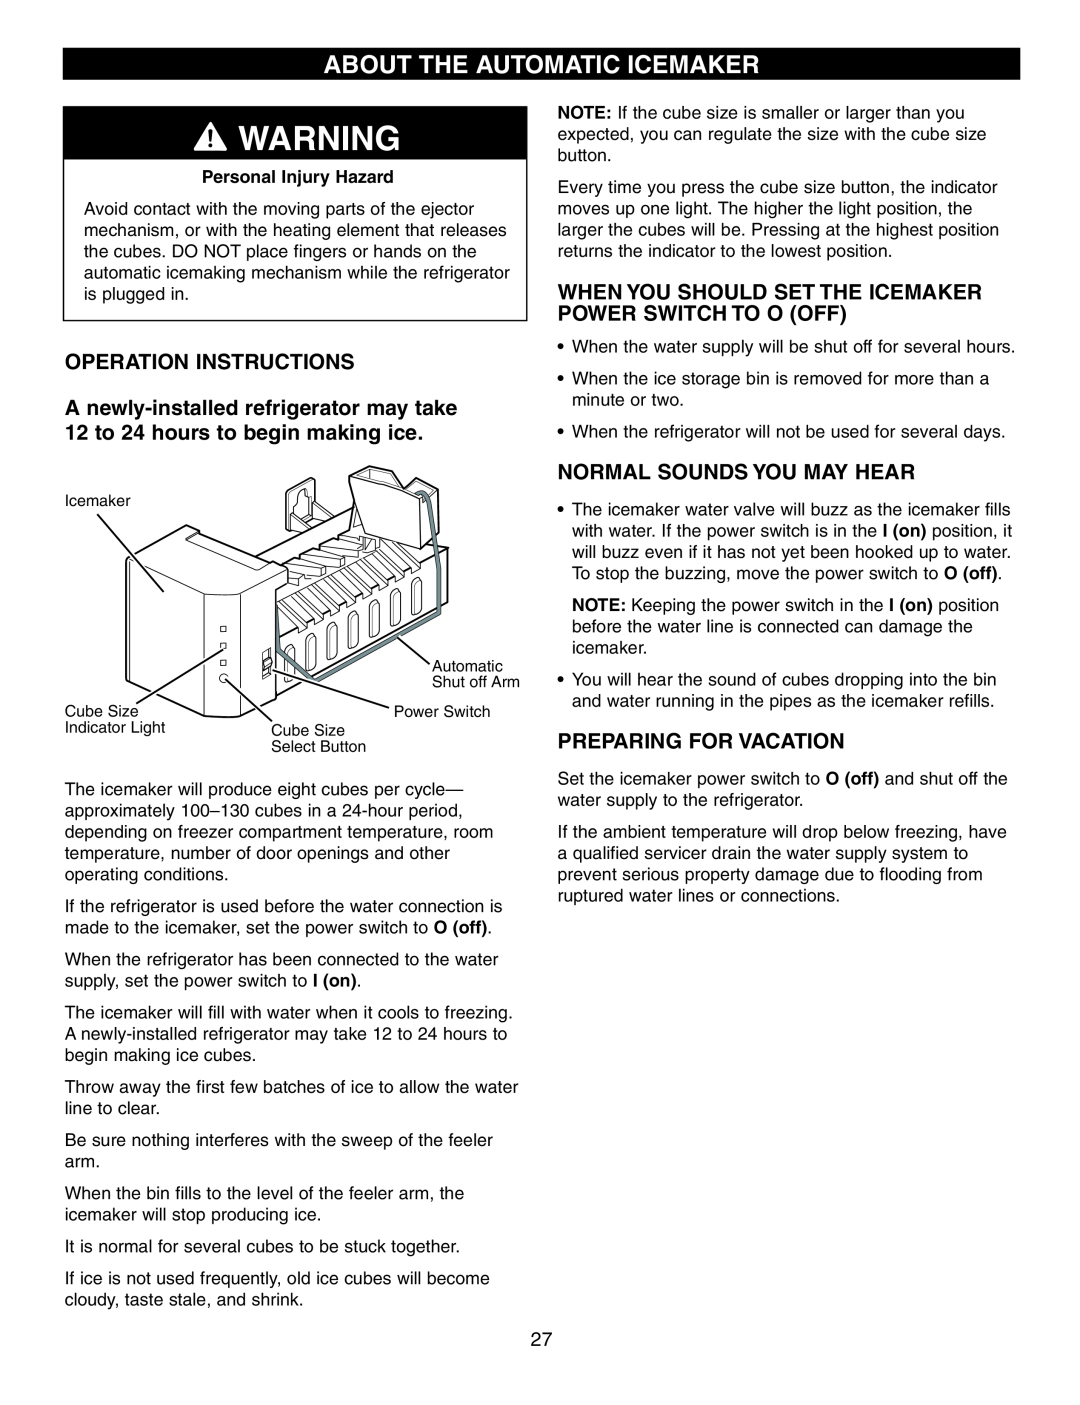 LG Electronics LFC25760 manual About The Automatic Icemaker, Operation Instructions, Normal Sounds You May Hear 